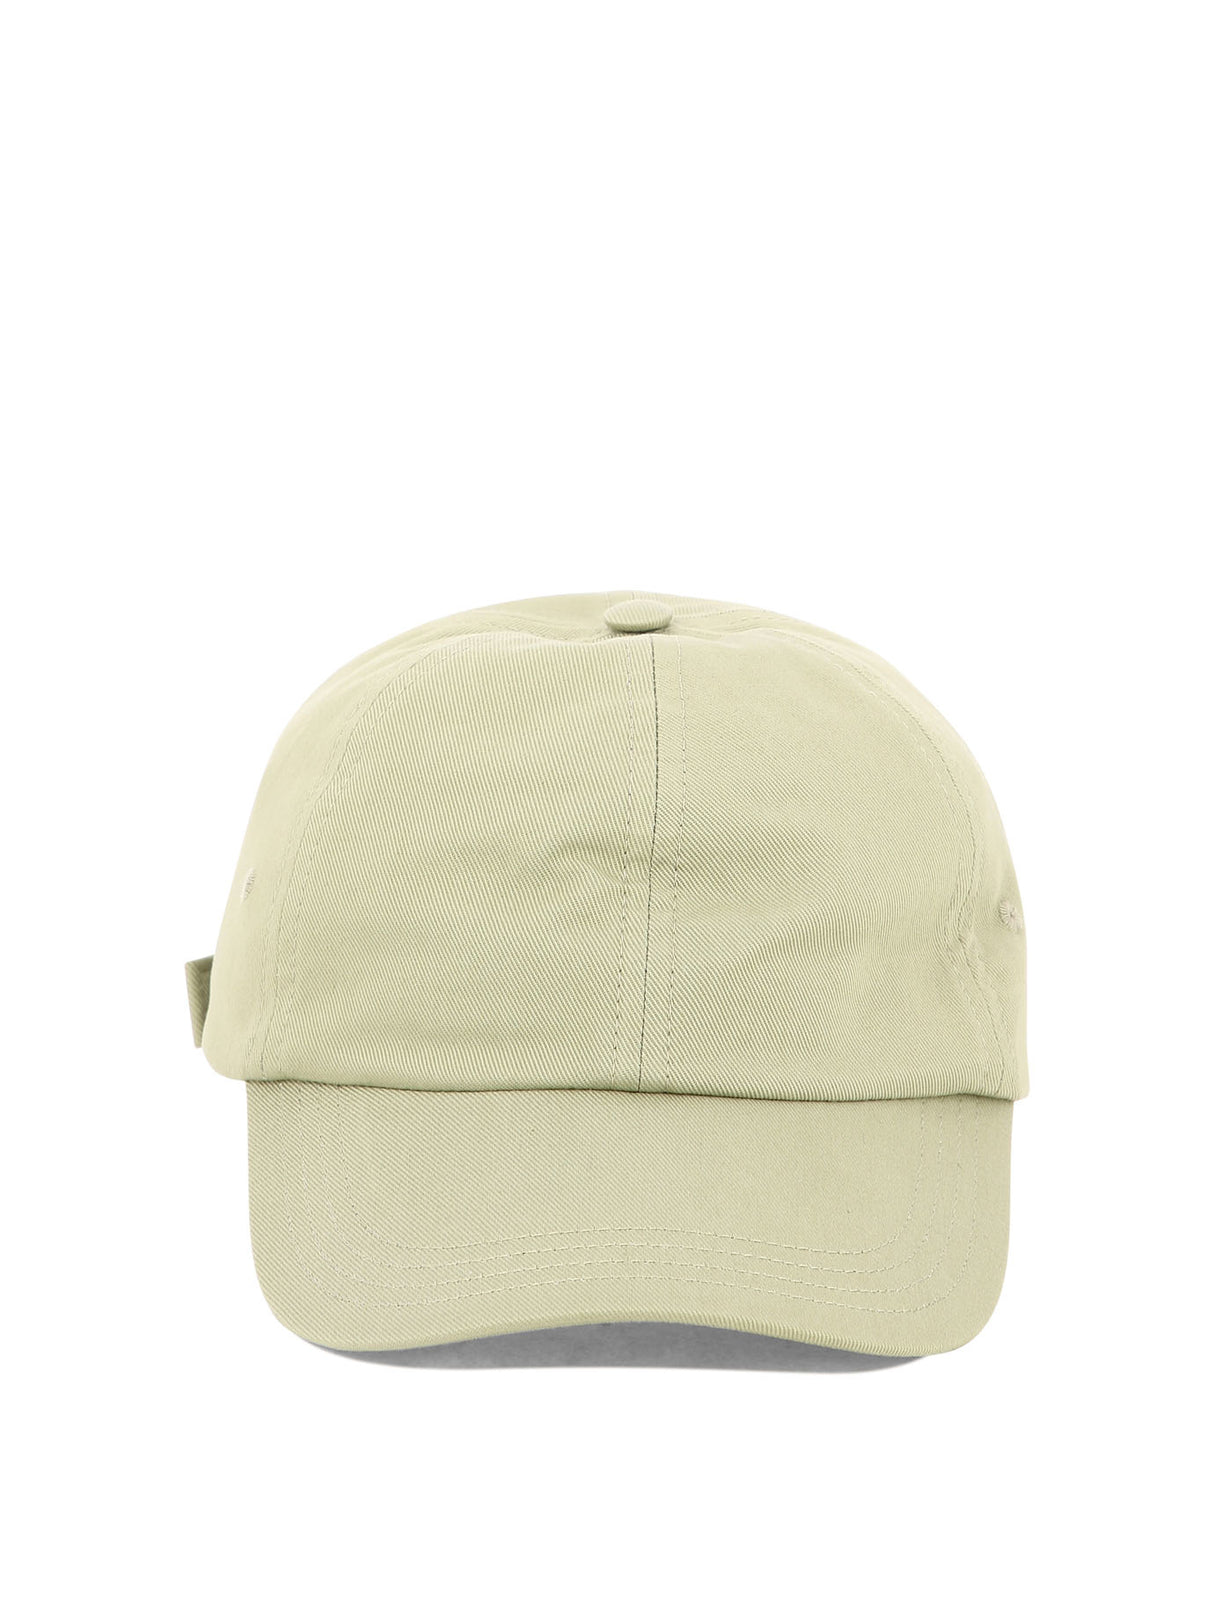 BURBERRY Sophisticated green cap for women - SS24 collection